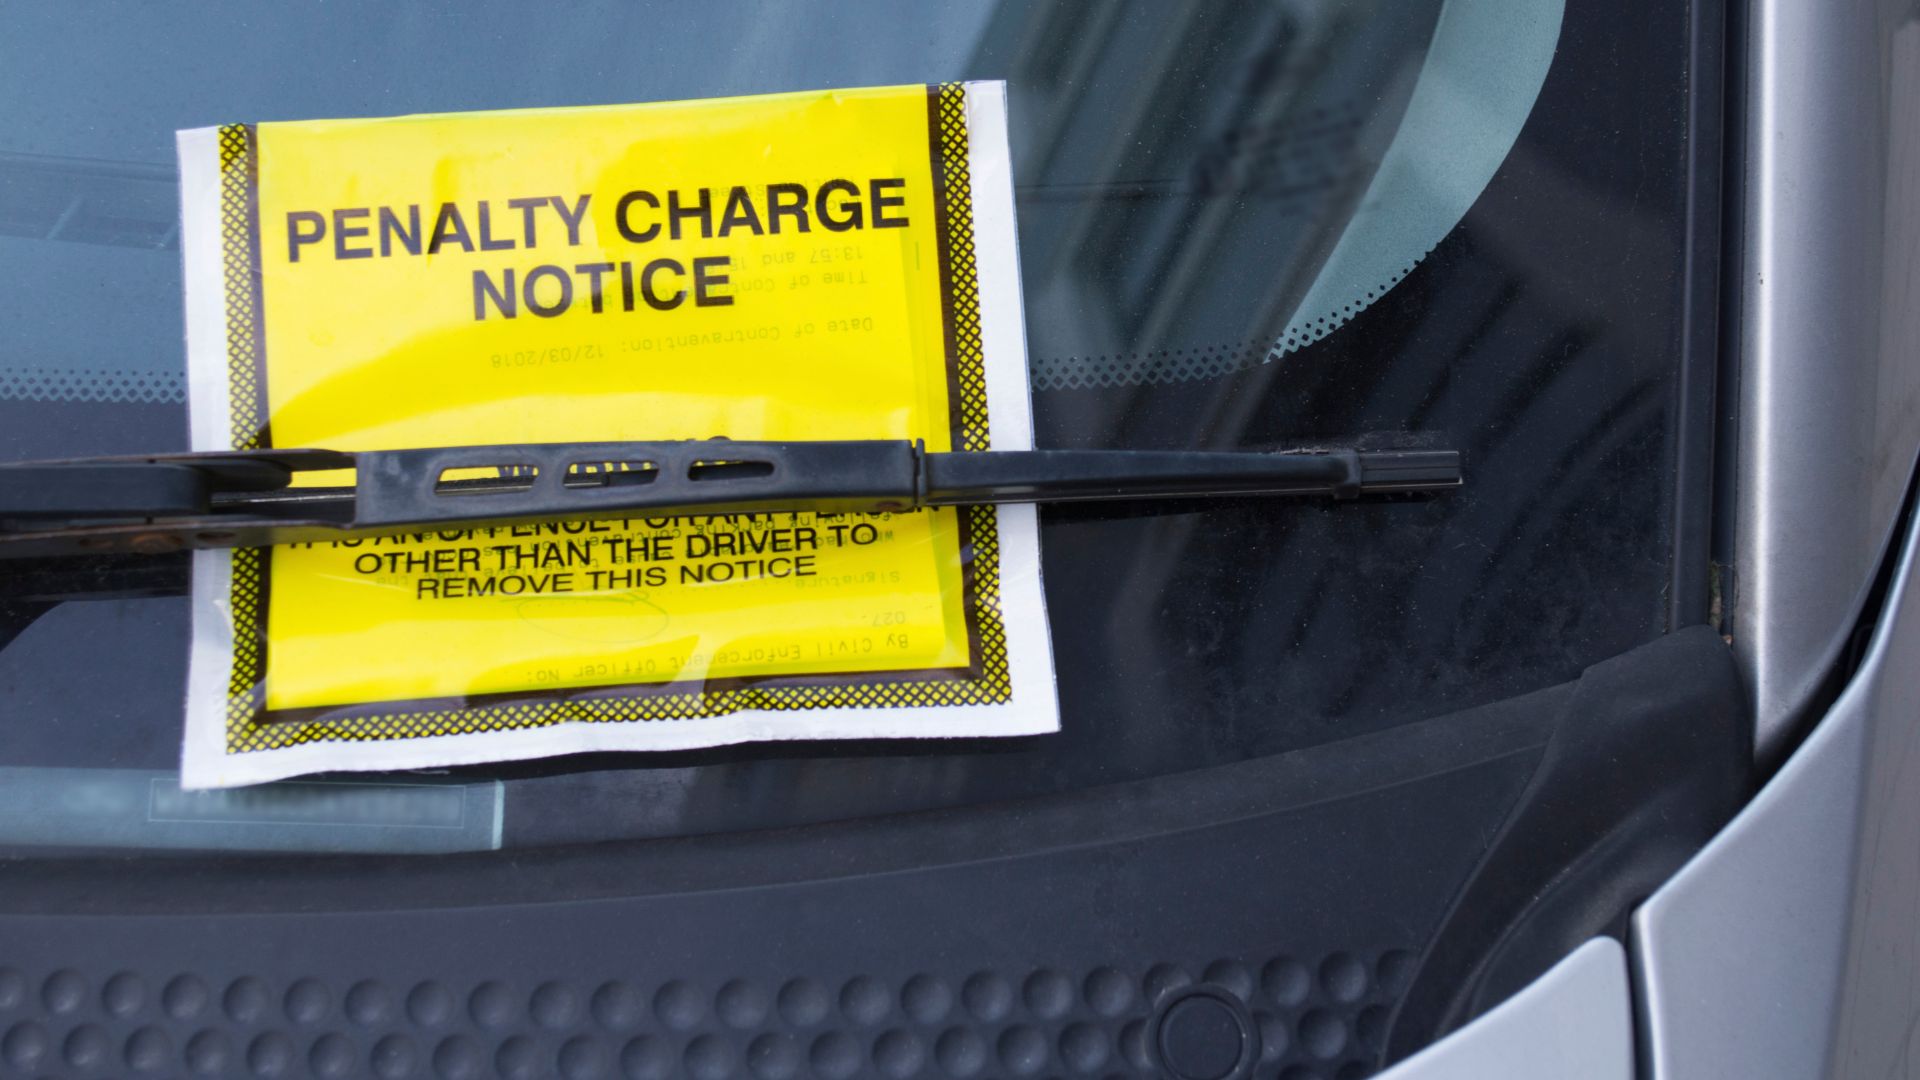 Parking profiteers: councils make millions from parking fines